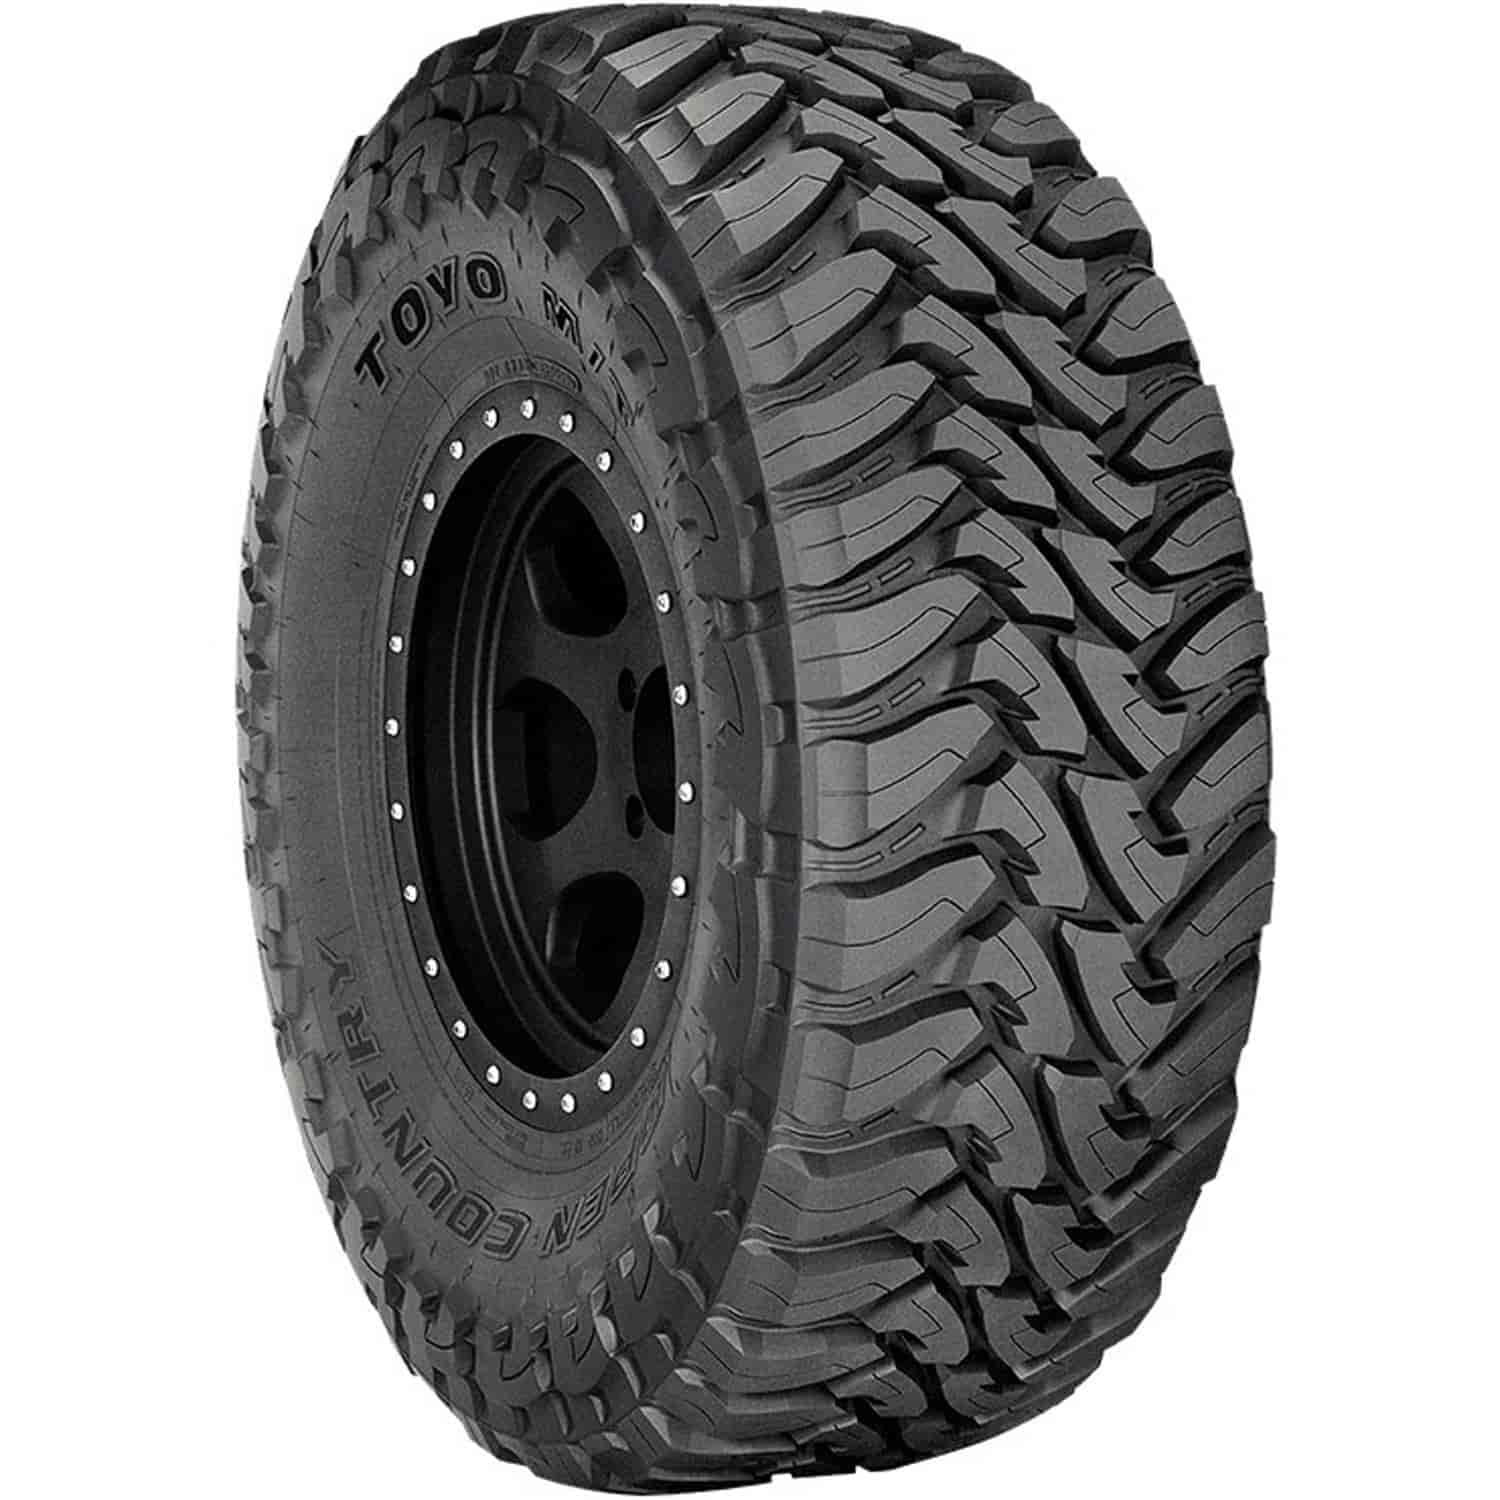 Open Country M/T LT305/70R16 124P E/10 33.0X12.00R16